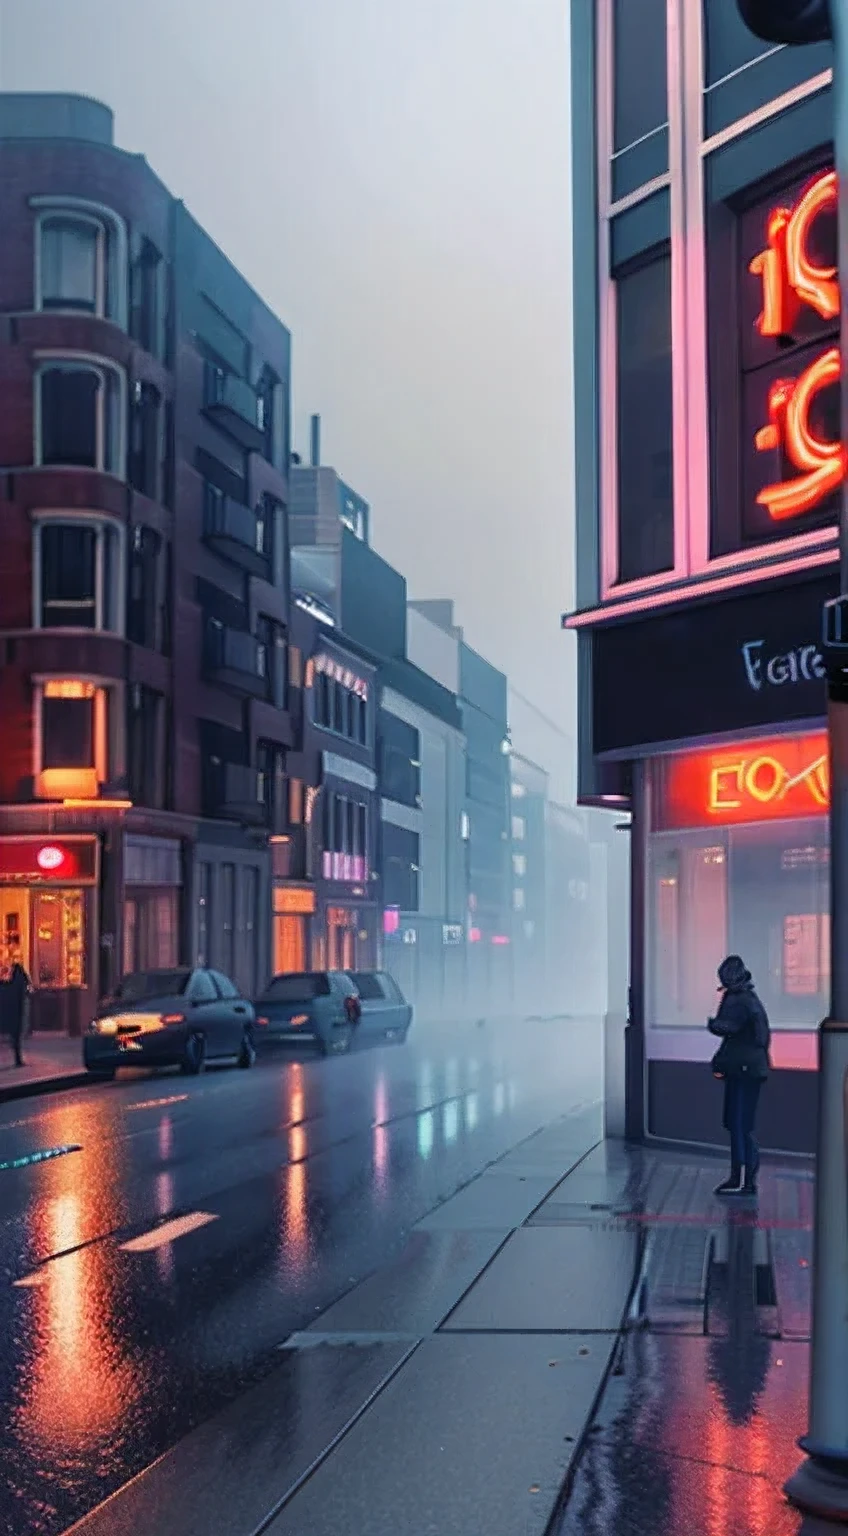 The scene features pedestrians walking down a street in a city at night. The street is illuminated by cinematic lighting, creating a photorealistic streetscape. The scene is inspired by the works of Eglon van der Neer, Chris LaBrooy, and Mads Berg. The street is enveloped in fog, creating a dusk atmosphere. The street signs are glowing, adding to the city street at dusk ambiance. The night is foggy and neon, with a city mist softlight. The scene is a 3D render by Beeple